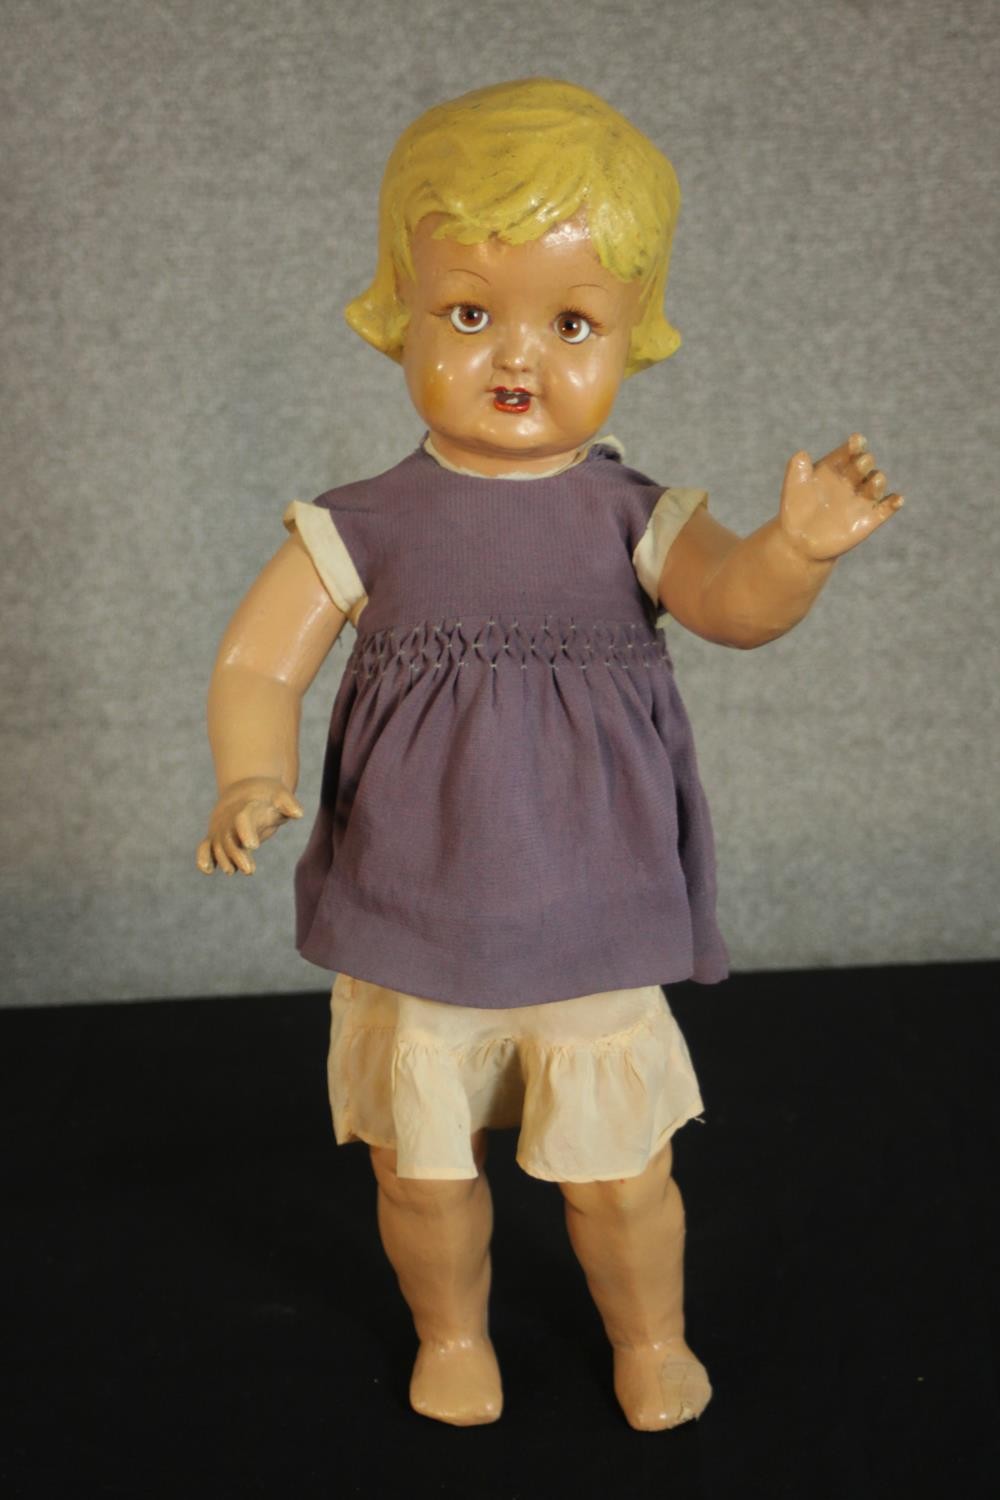 A late 19th century-early 20th century painted papier mache doll with glass eyes and voice box. (not